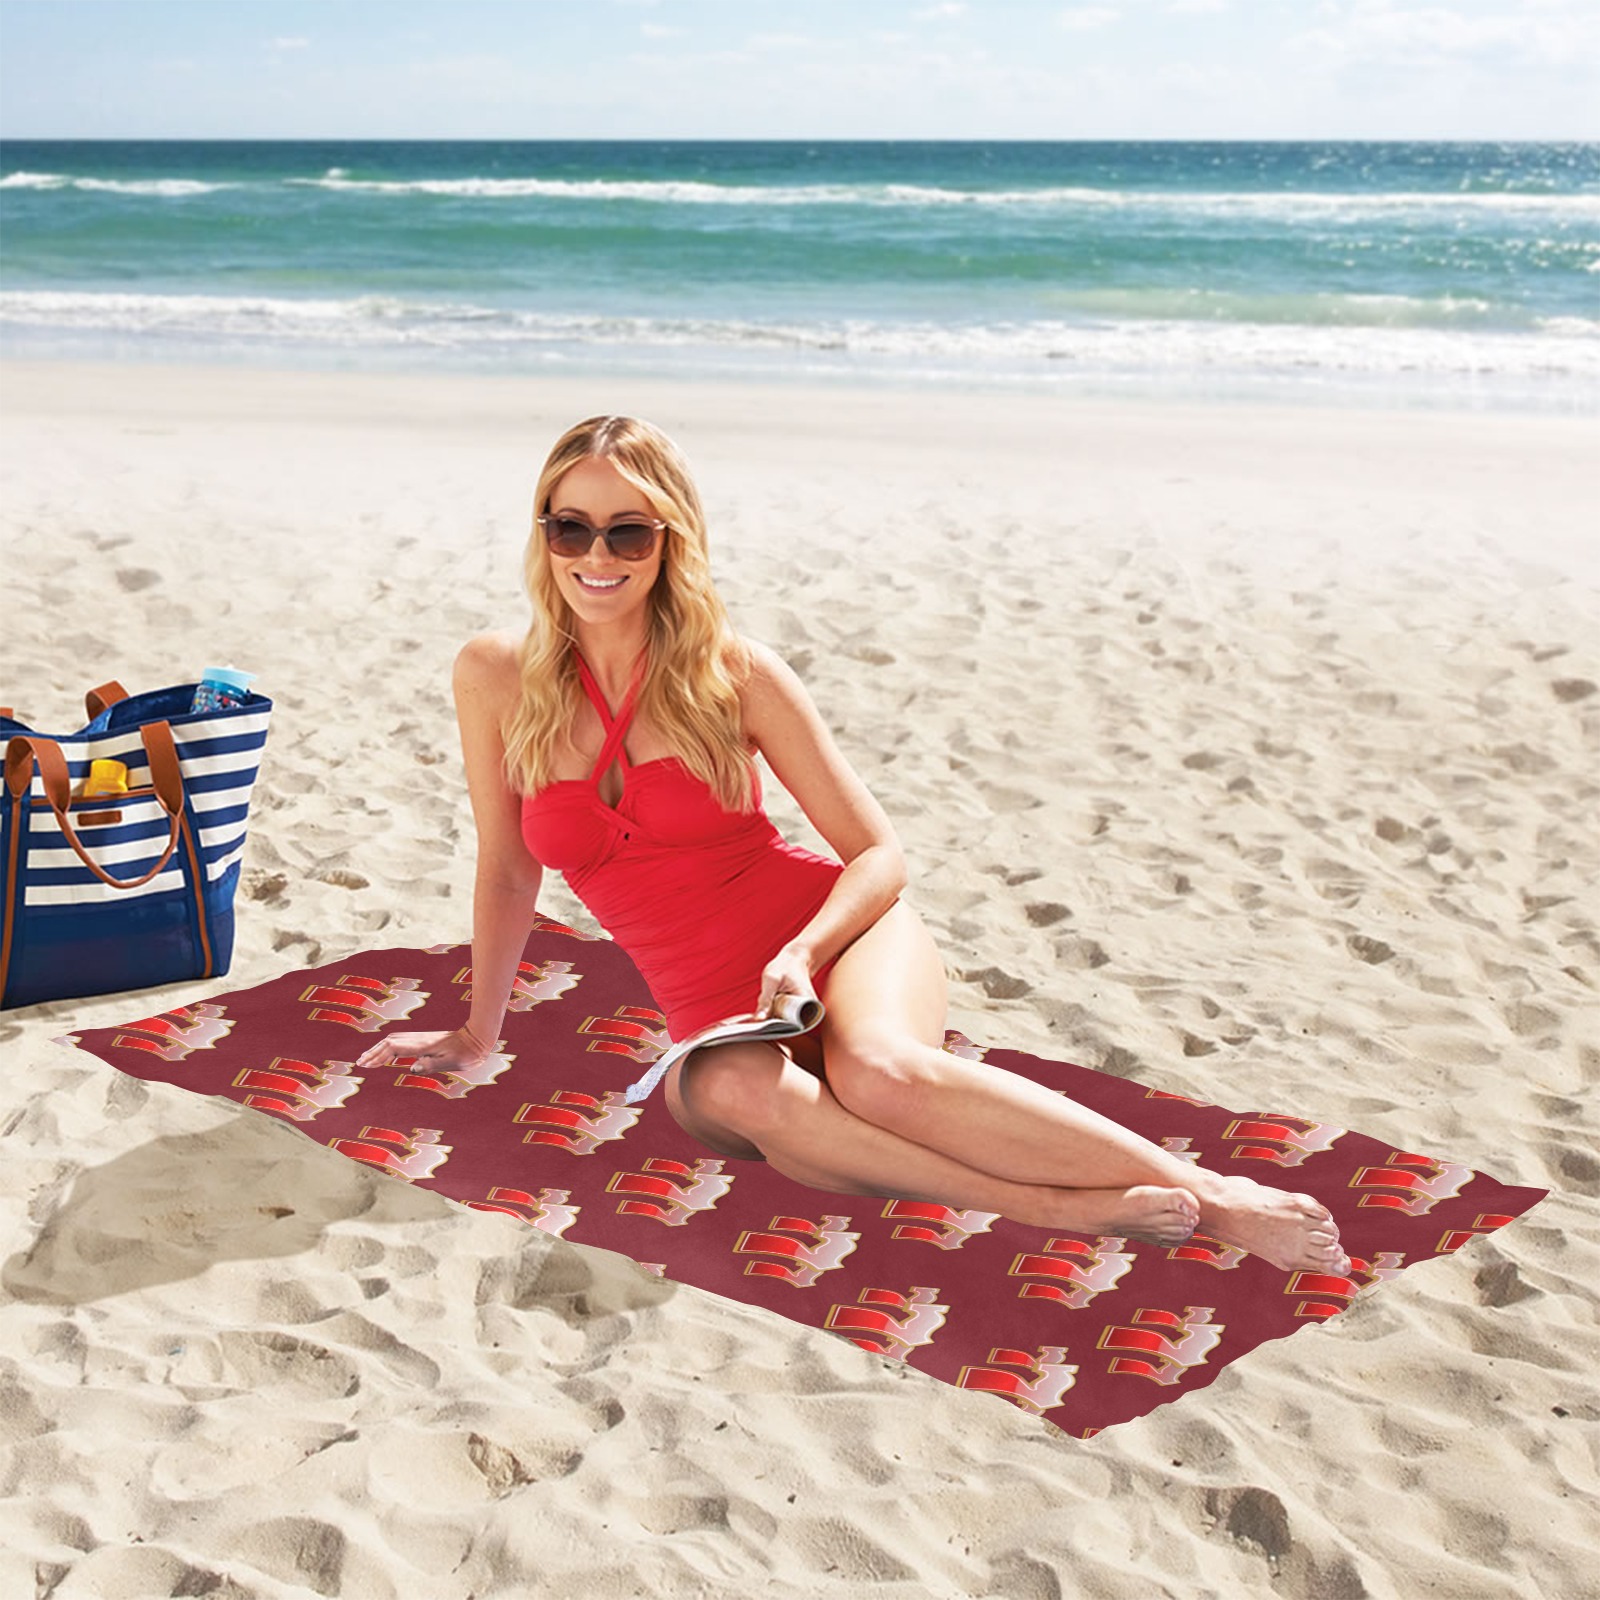 Lucky Sevens 777 on Red Beach Towel 30"x 60"